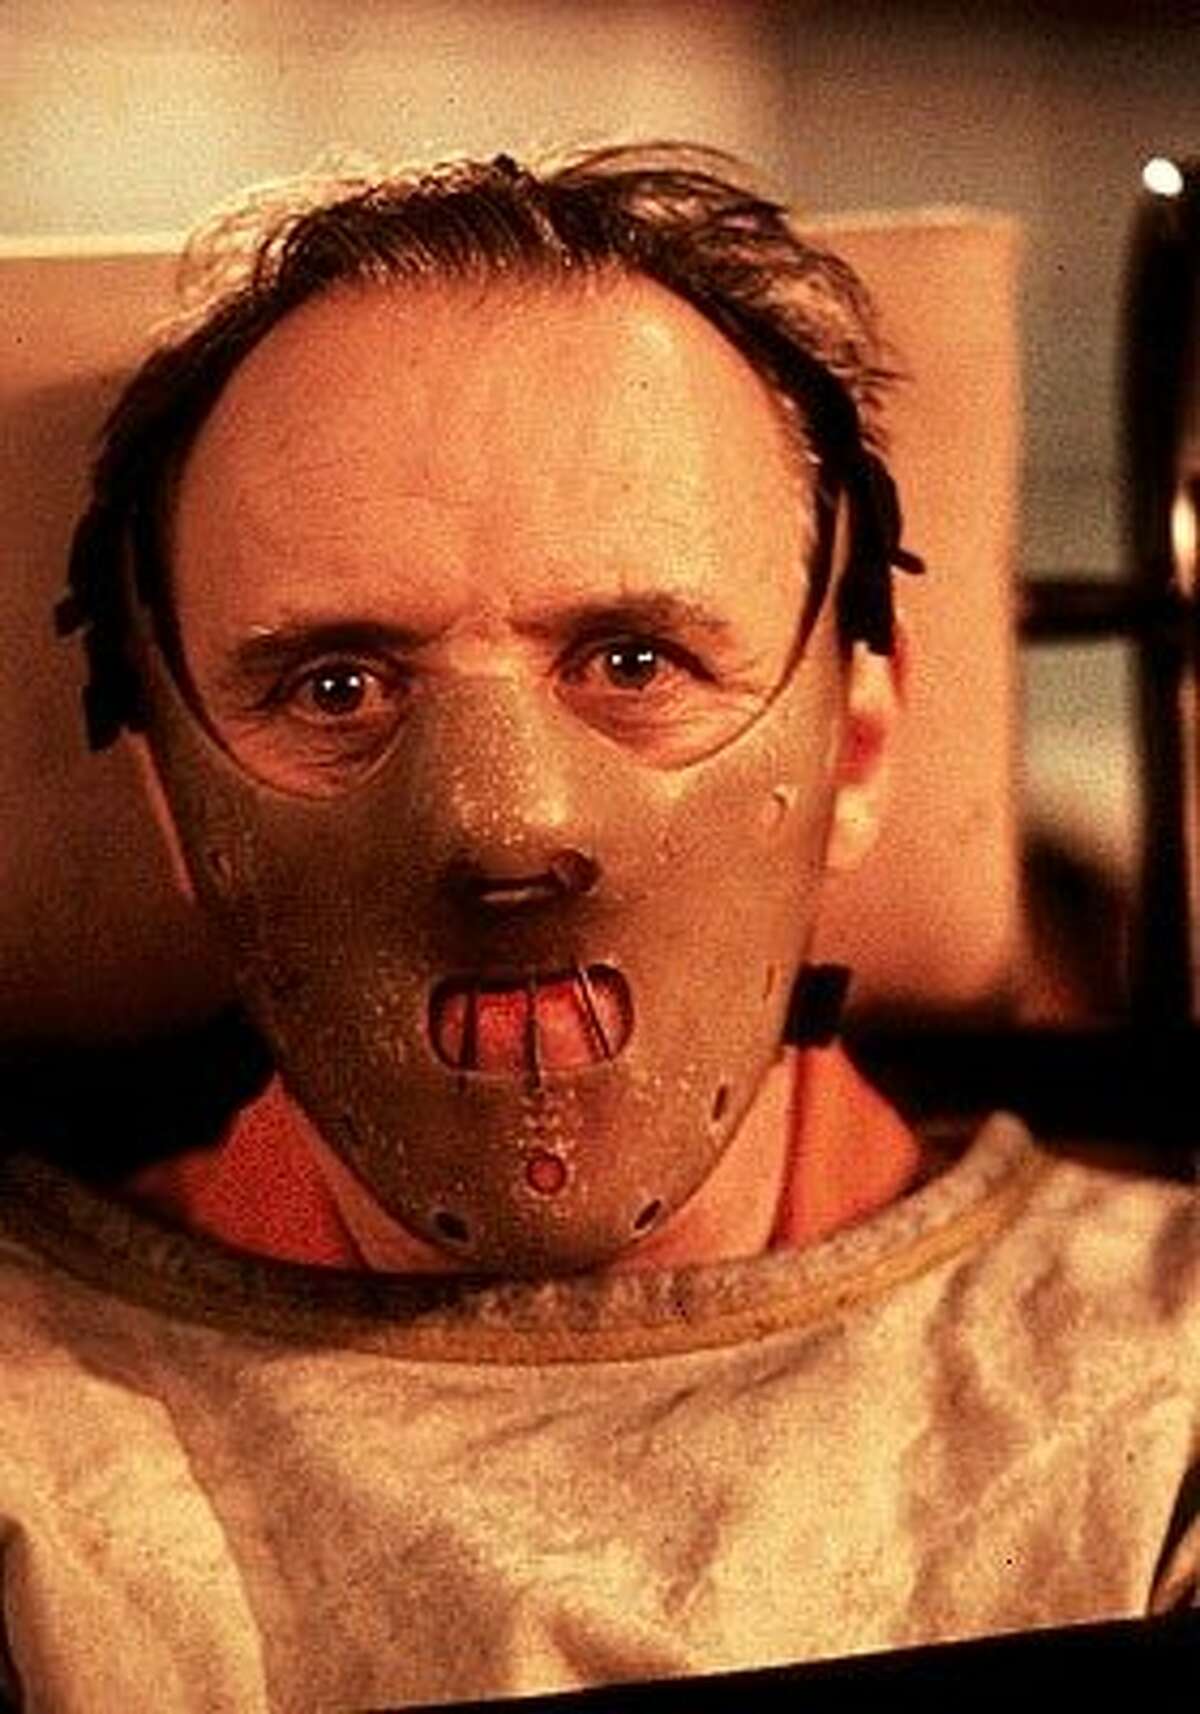 The Silence of the Lambs (1991) "A census taker once tried to test me. I ate his liver with some fava beans and a nice Chianti."